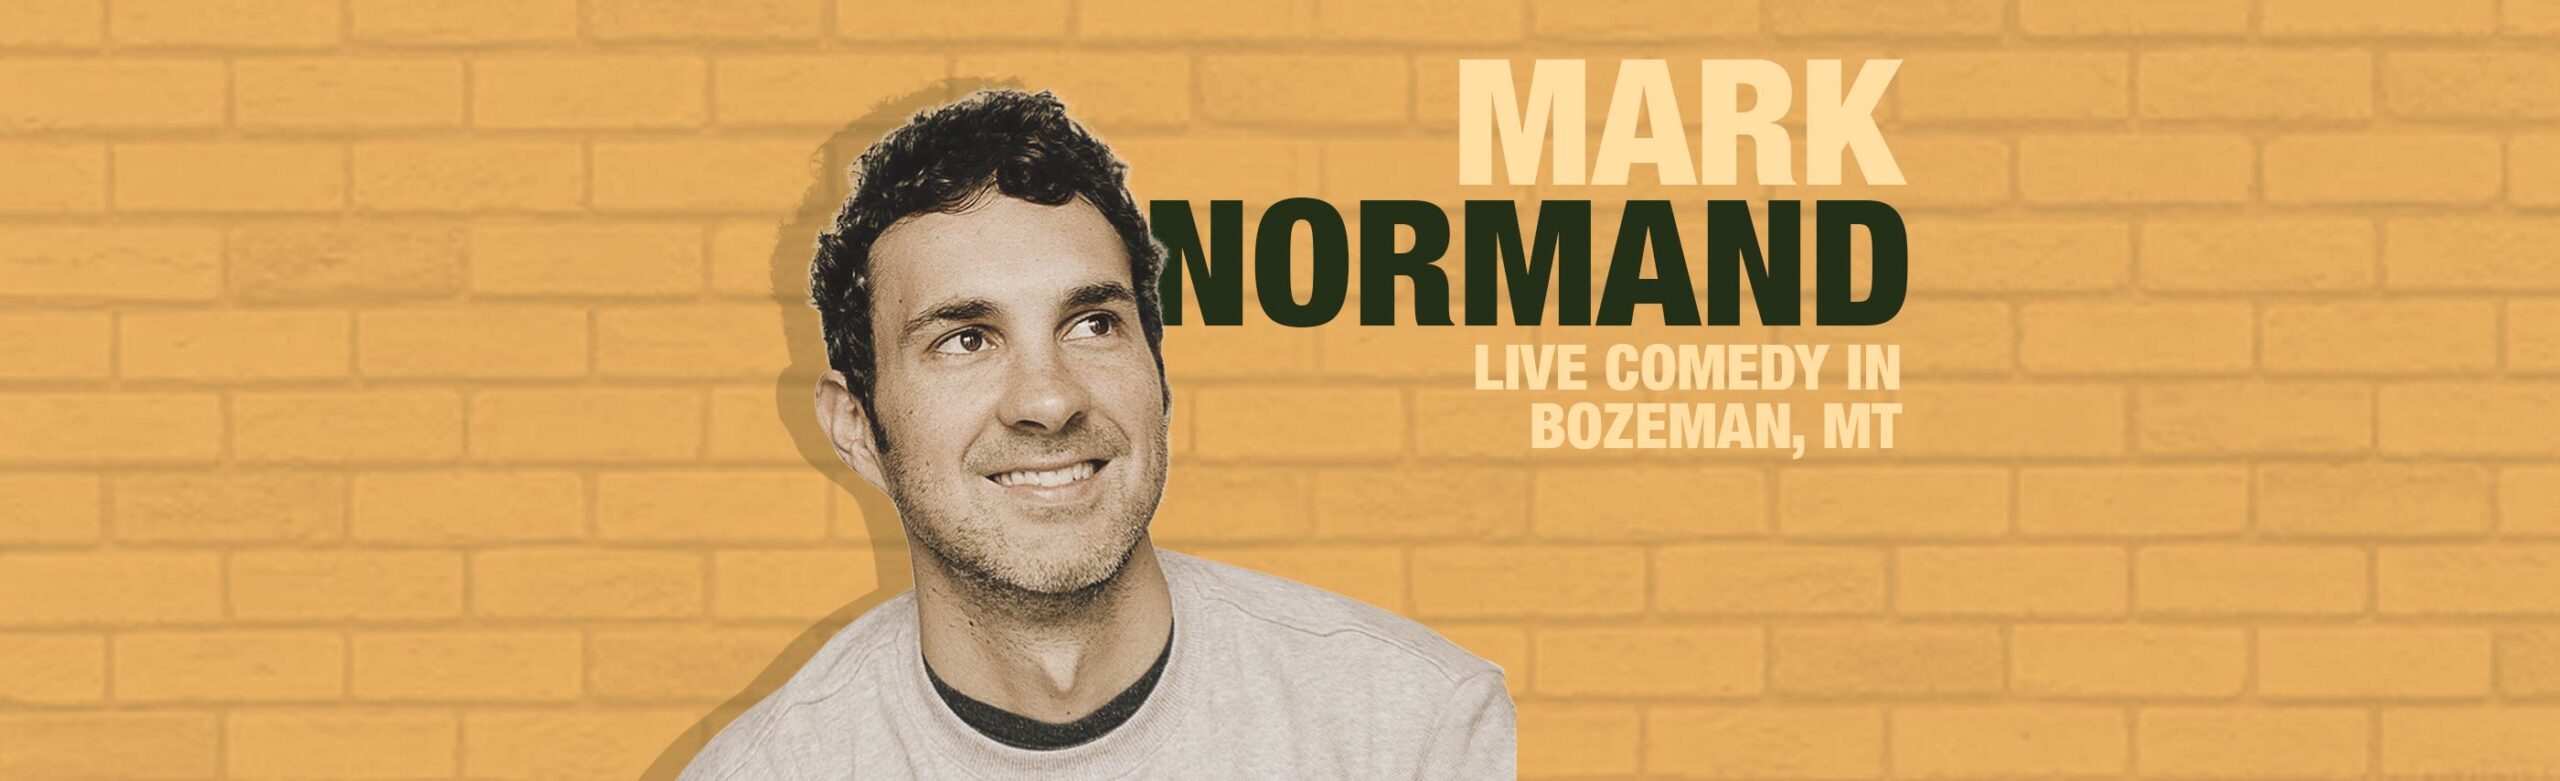 Comedy! Mark Normand Announces 420 Show at The ELM Image